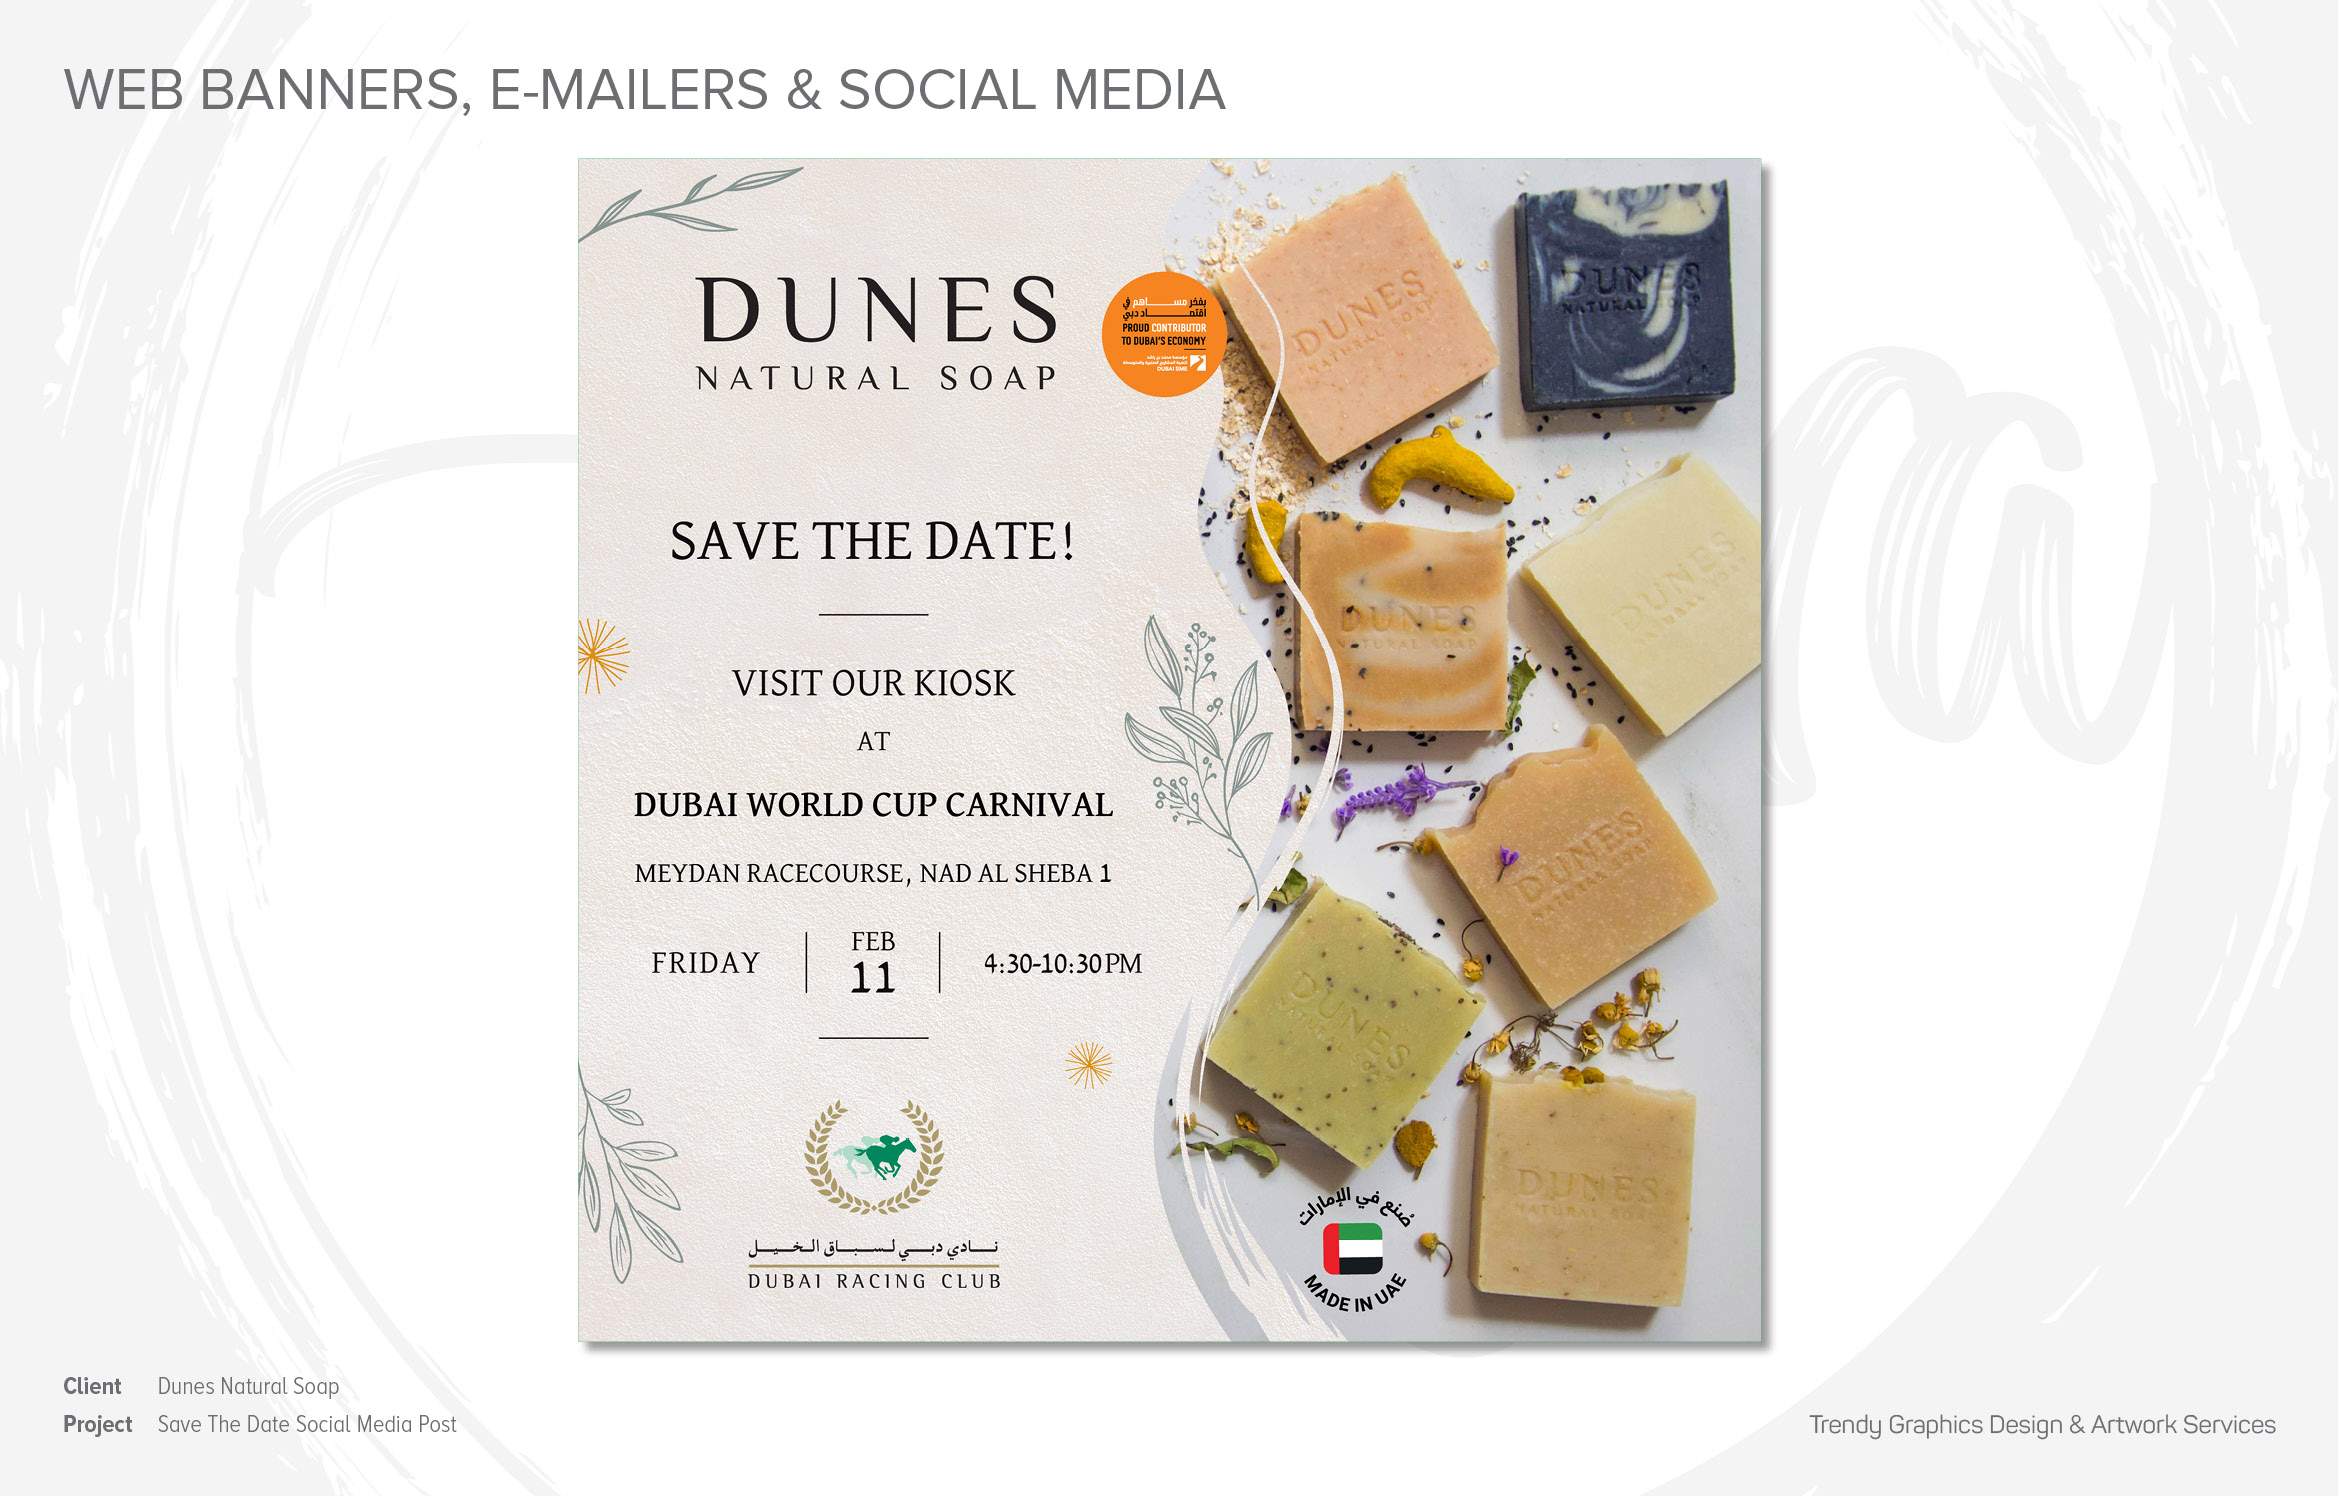 Dunes Natural Soap – Save The Date Social Media Post